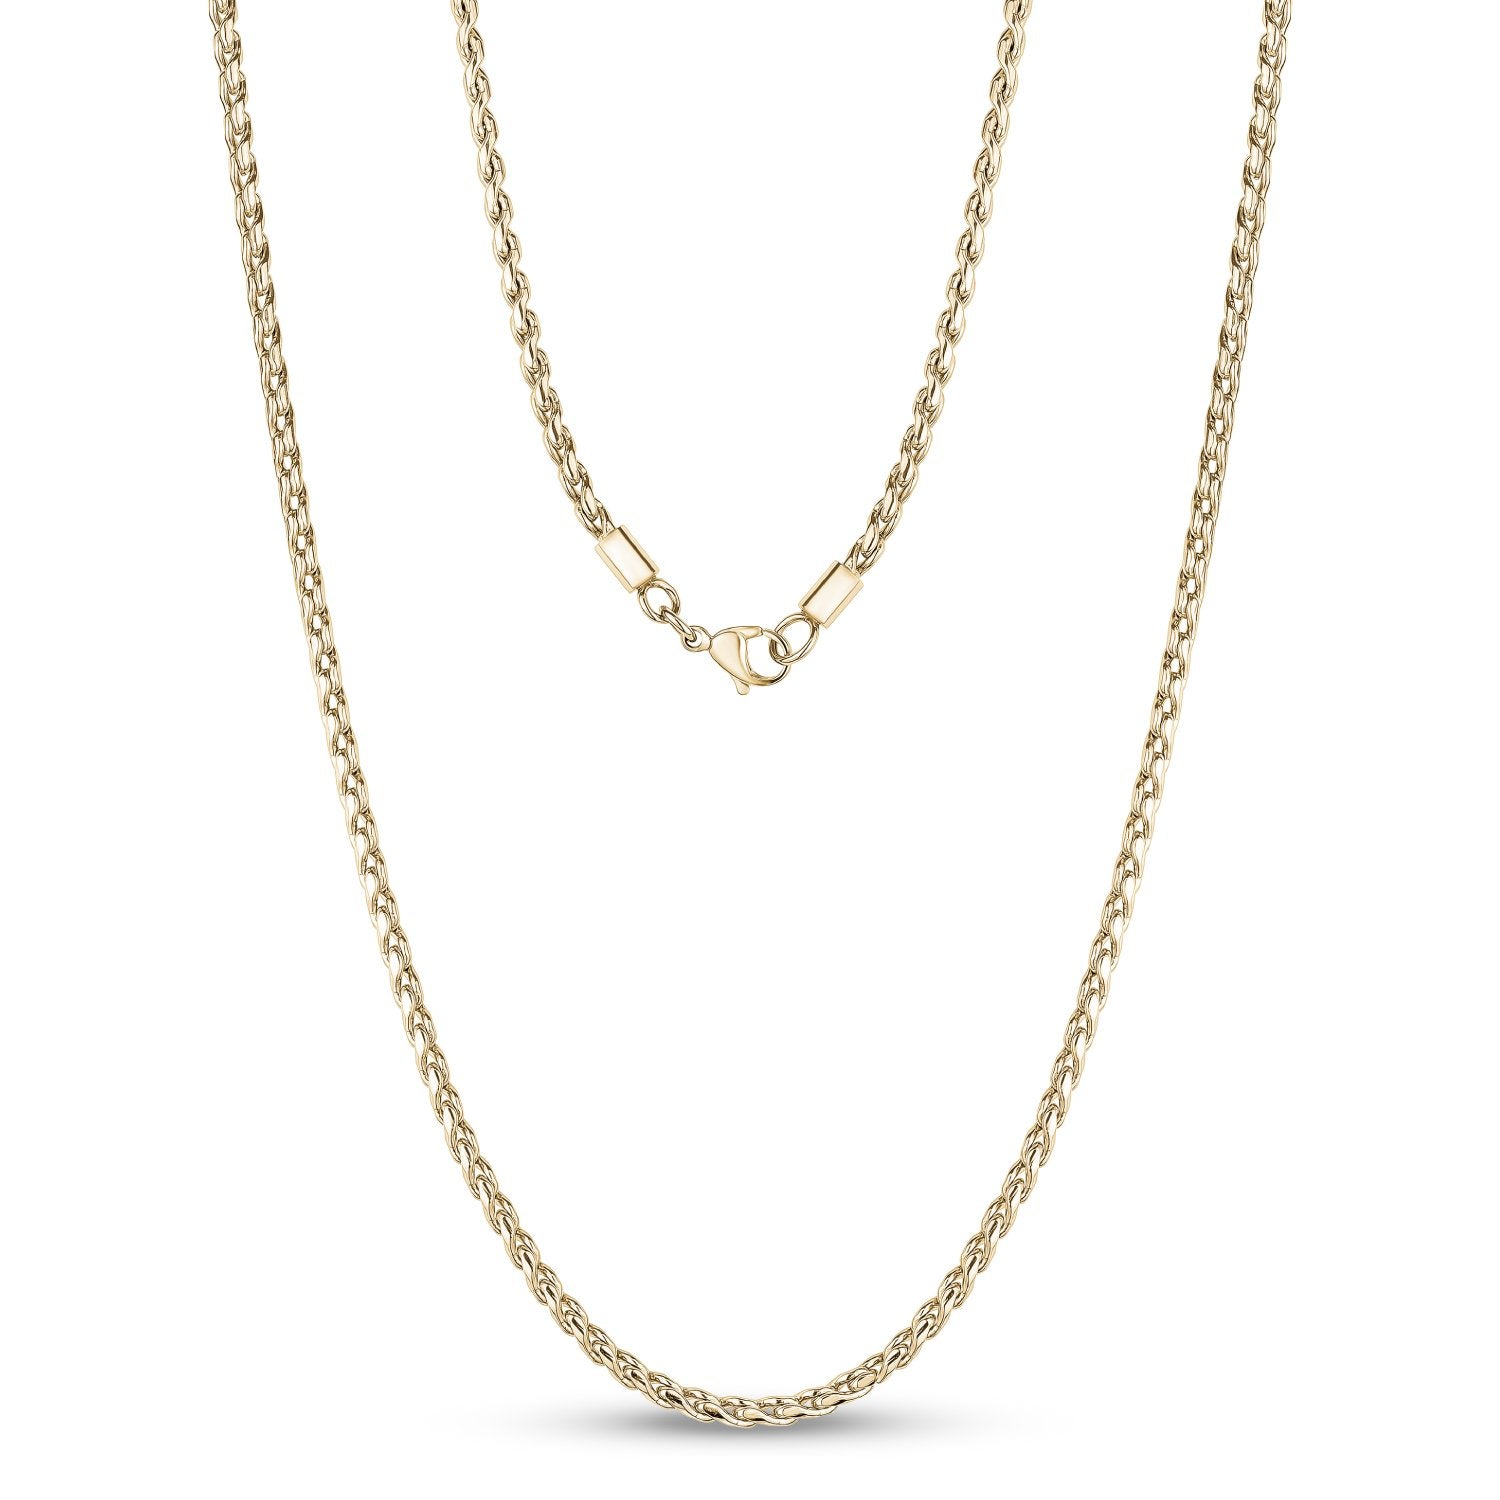 Buy 18K Gold Serpentine Chain, Layering Necklace, Flat Chain, Gift for Her,  17 Inch Chain, 5LXM0QUV Online in India - Etsy